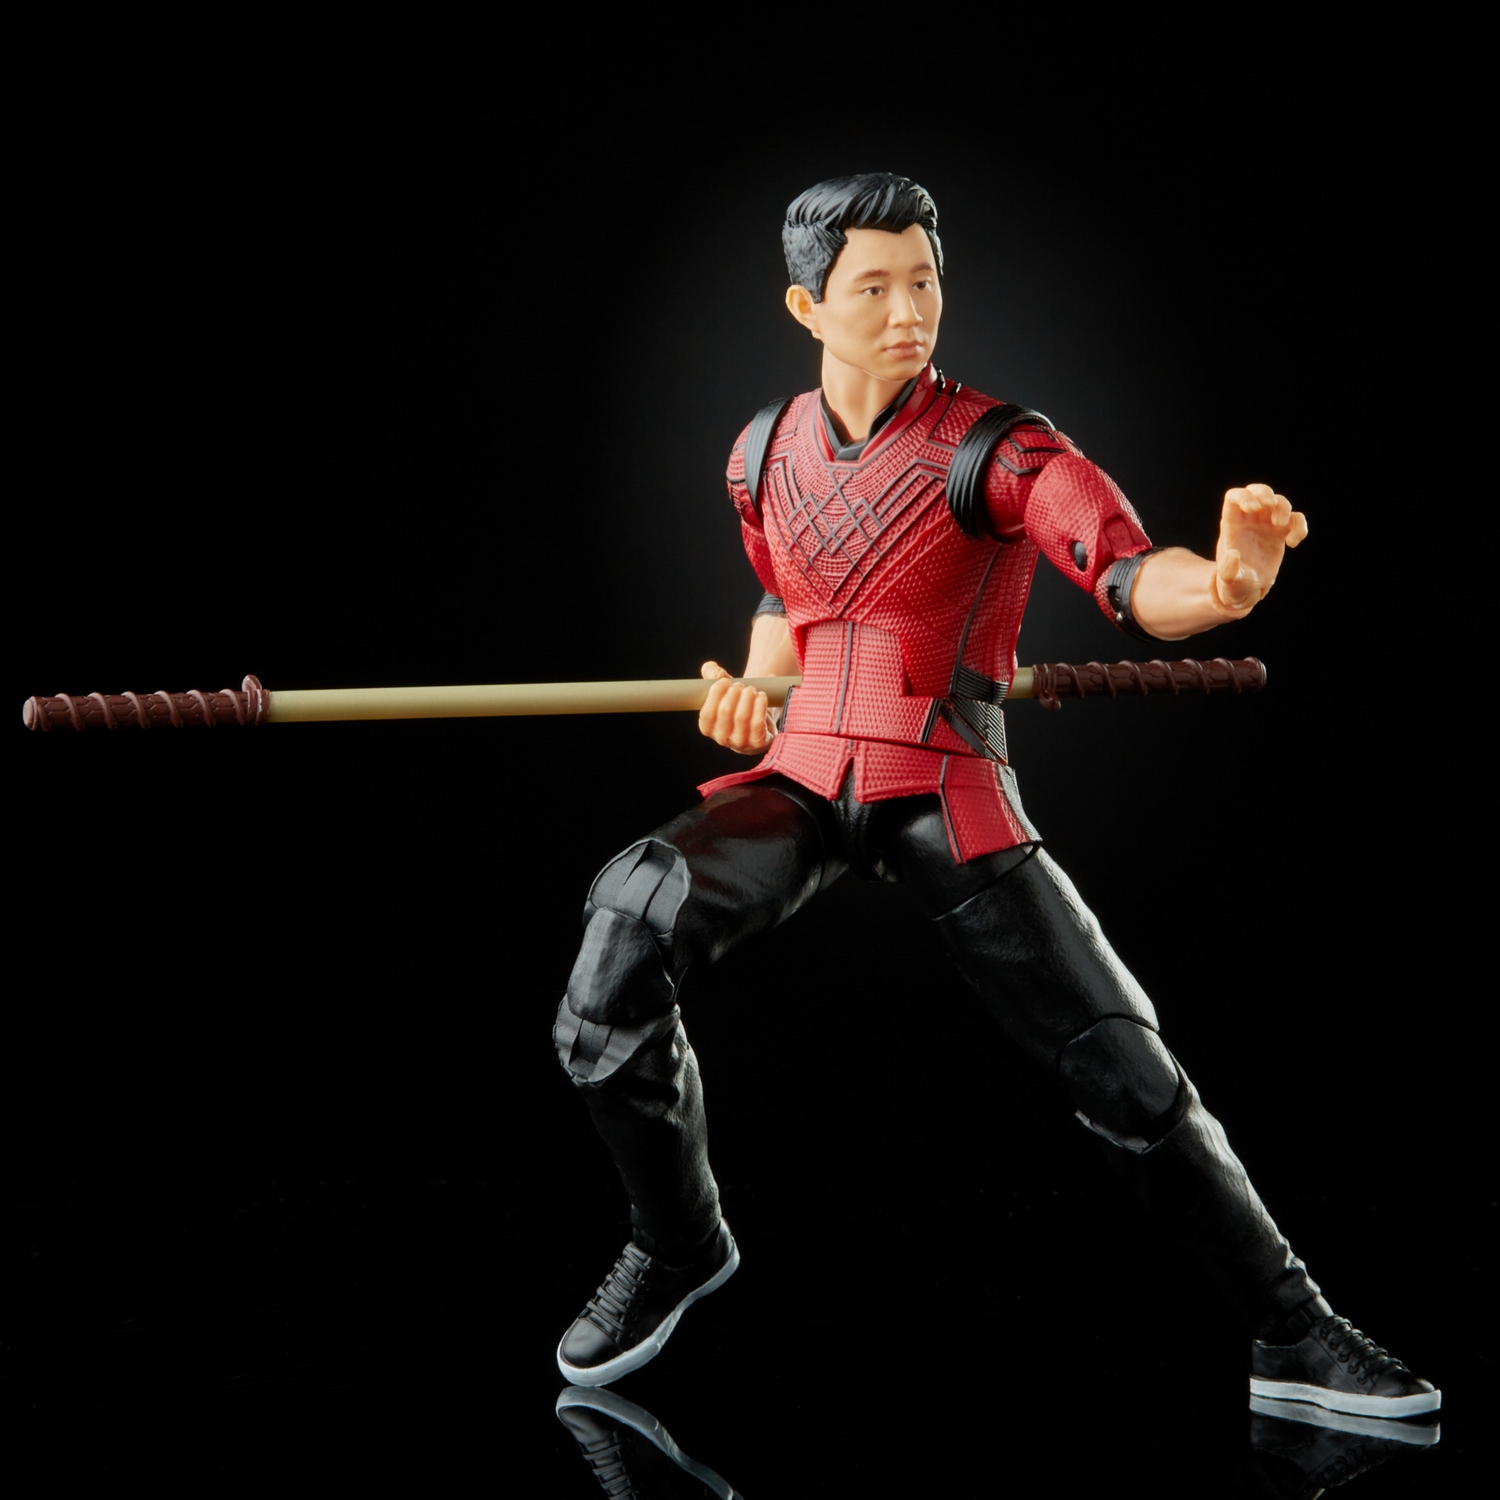 MARVEL LEGENDS SERIES 6-INCH SHANG-CHI AND THE LEGEND OF THE TEN RINGS - Shang-Chi oop3.jpg